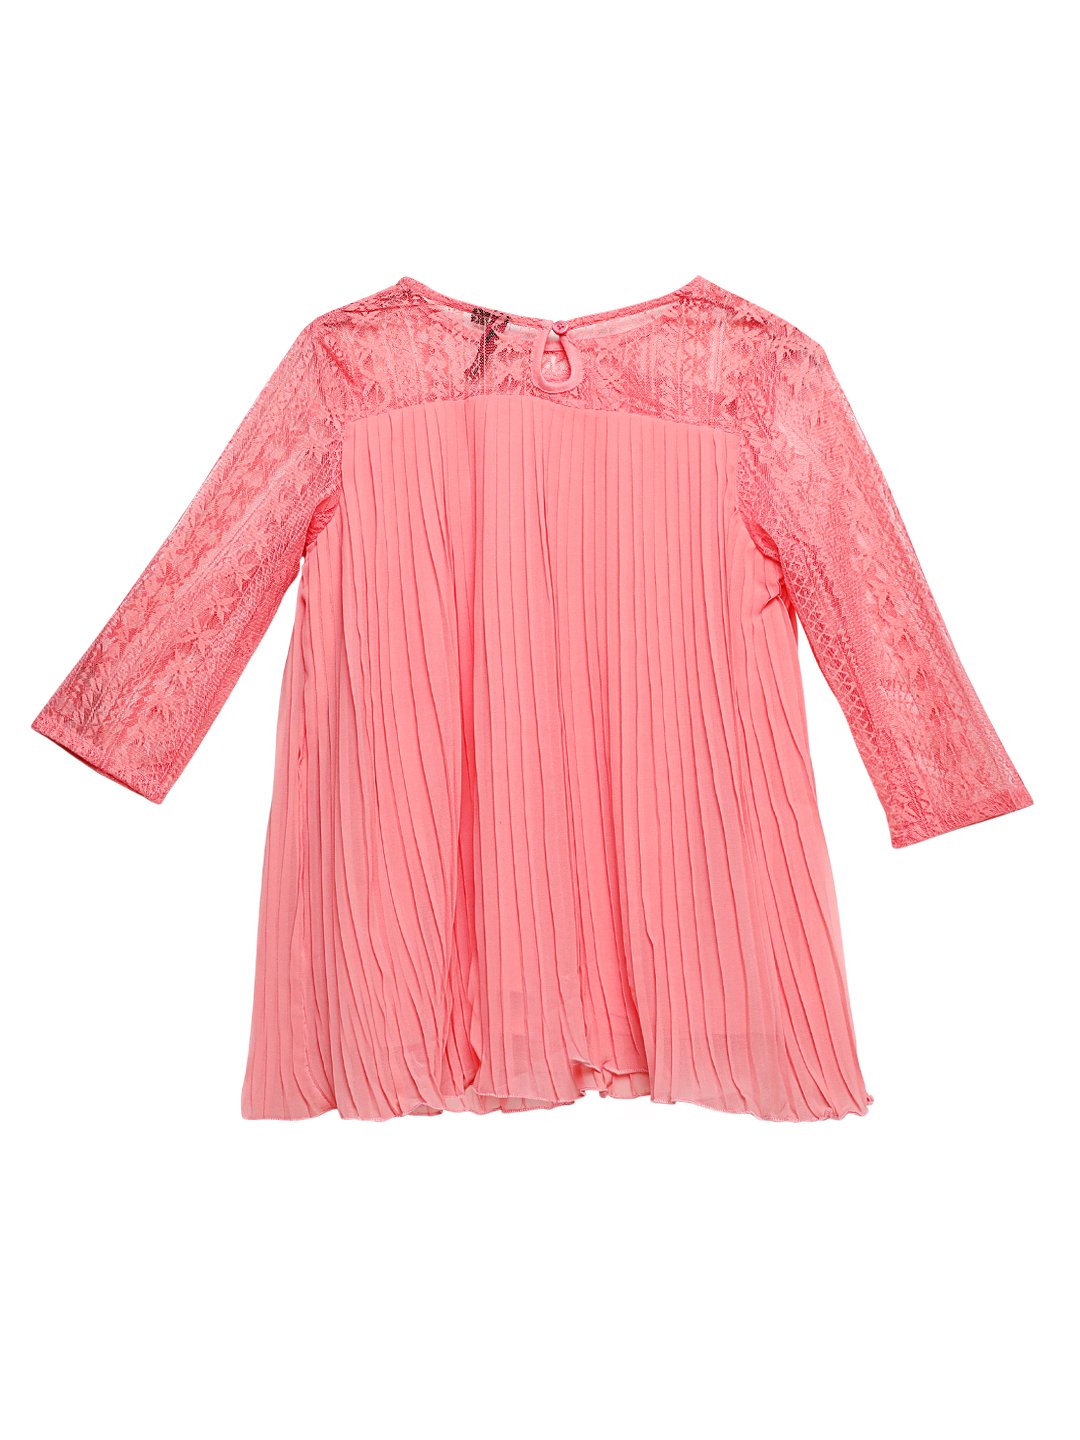 Ishin Girls Polyester Pink Solid Pleated Top